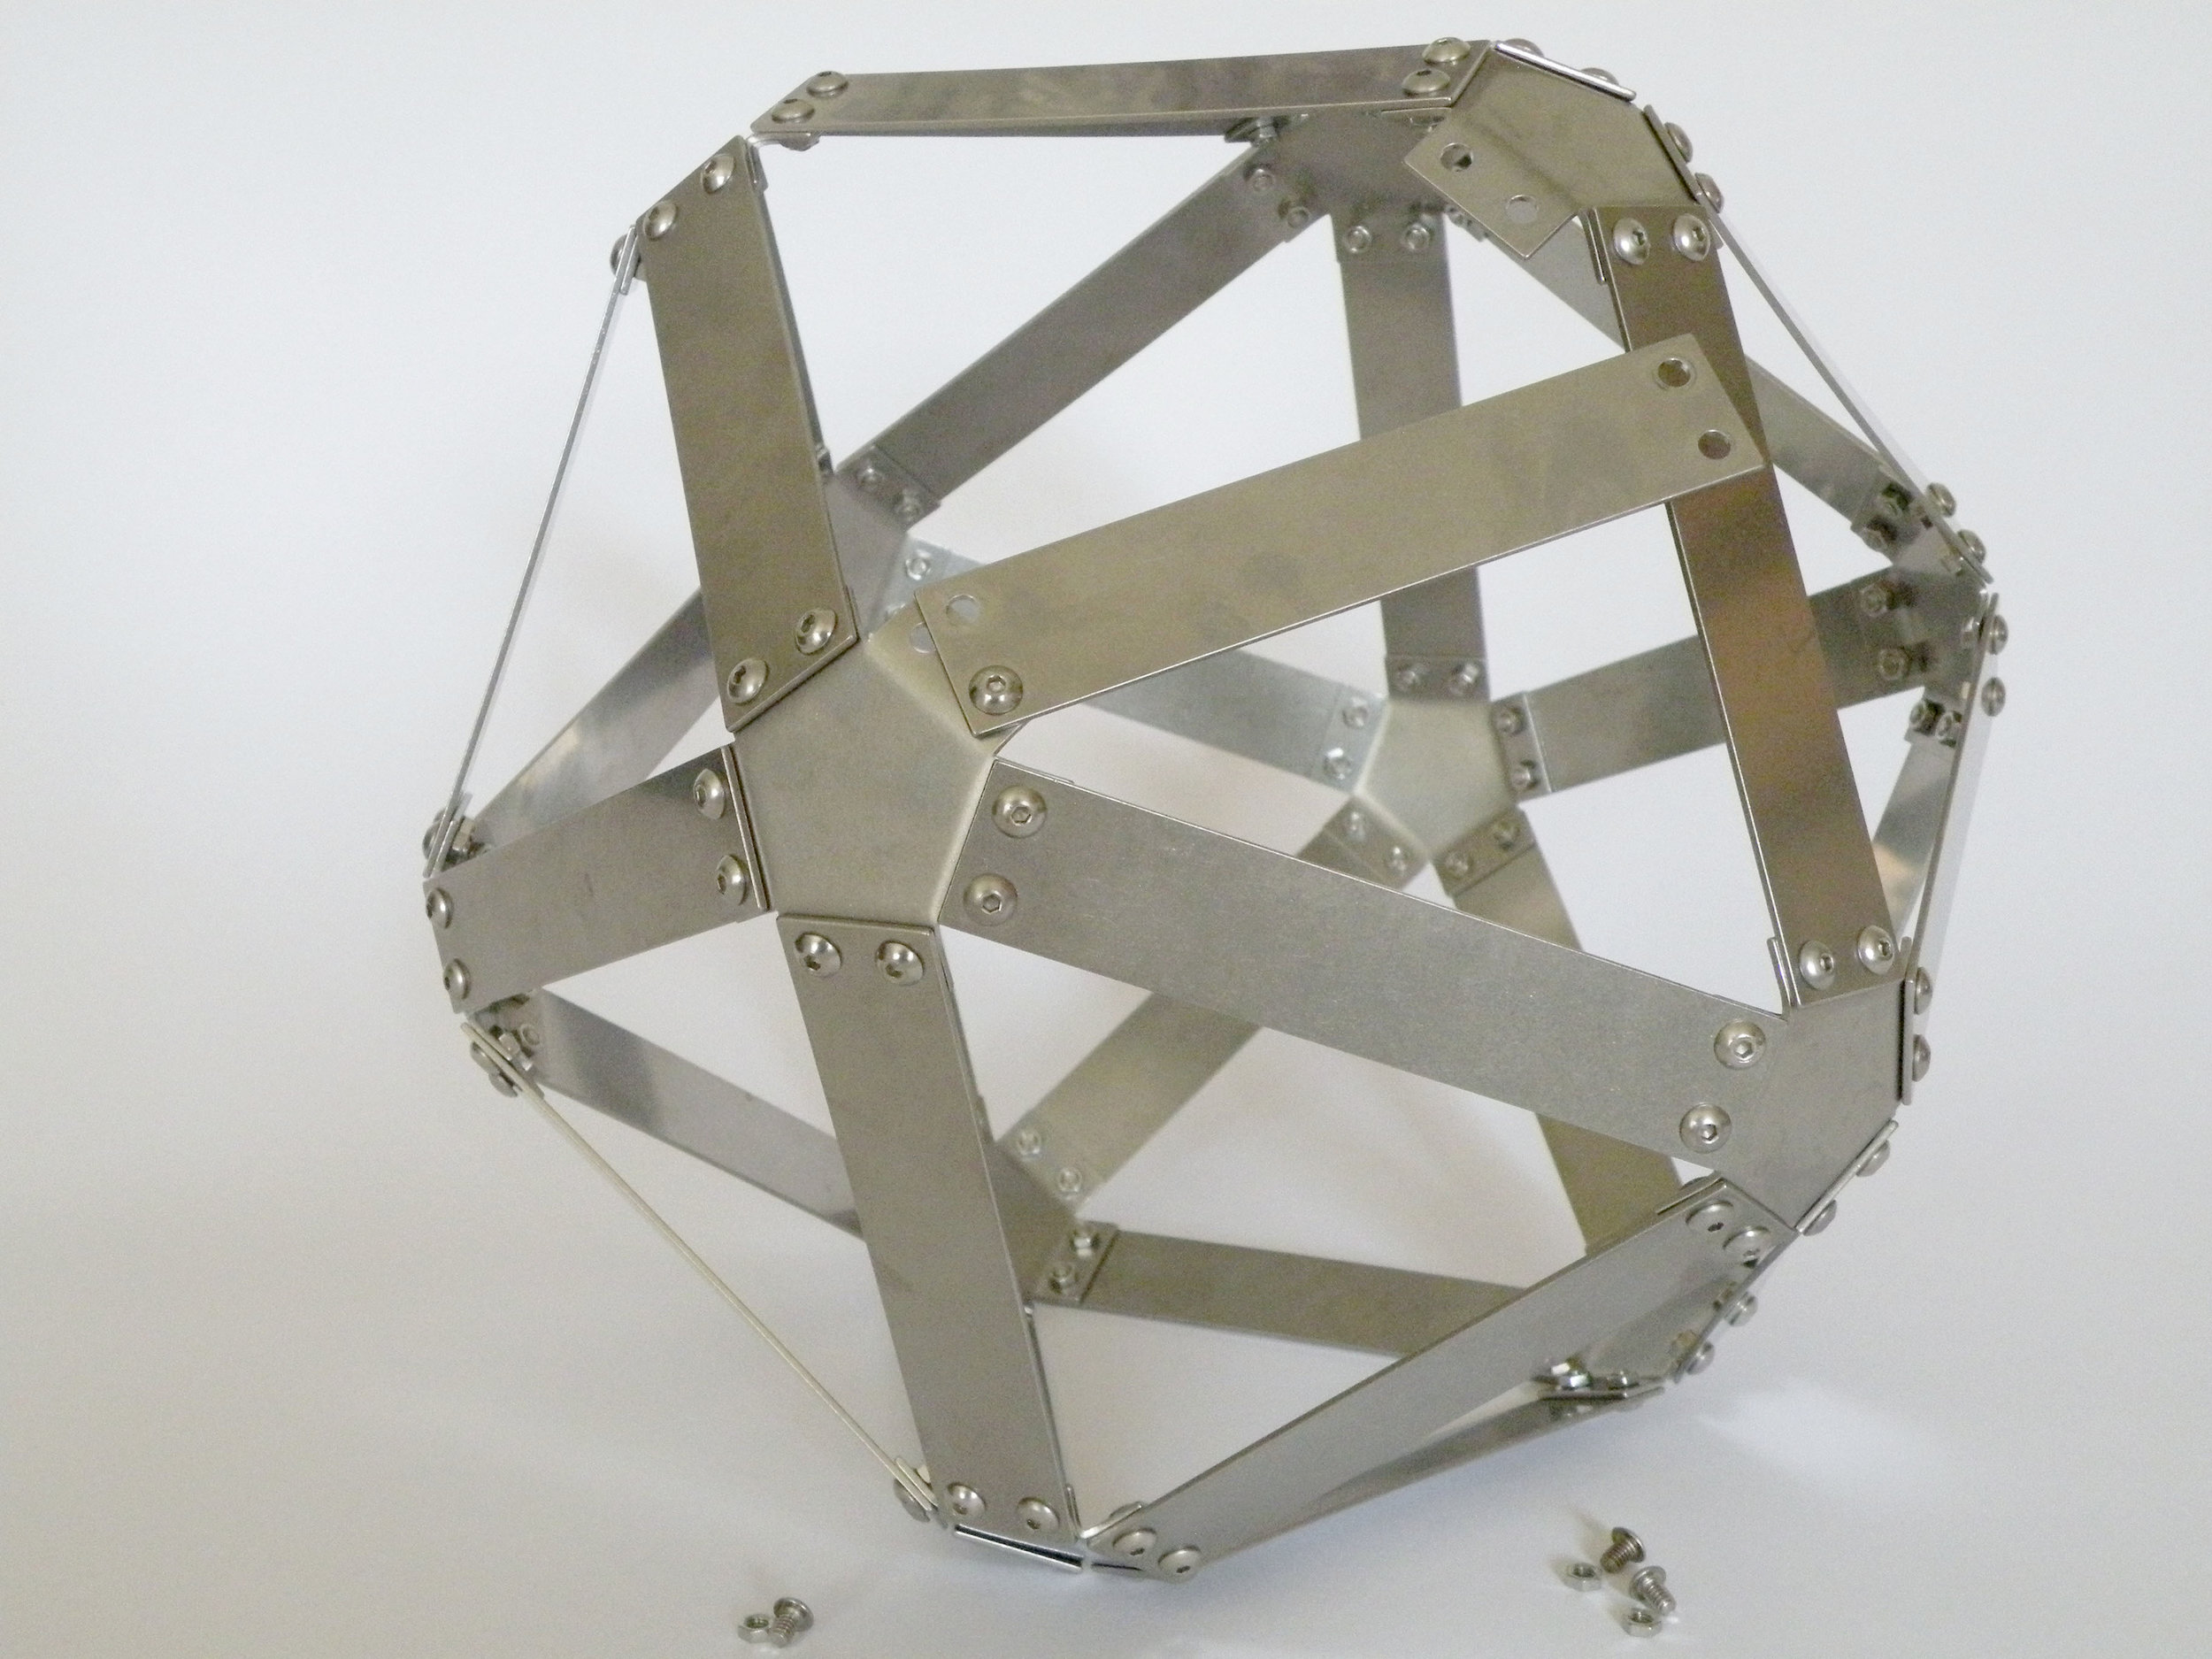 The construction of a metal icosahedron.